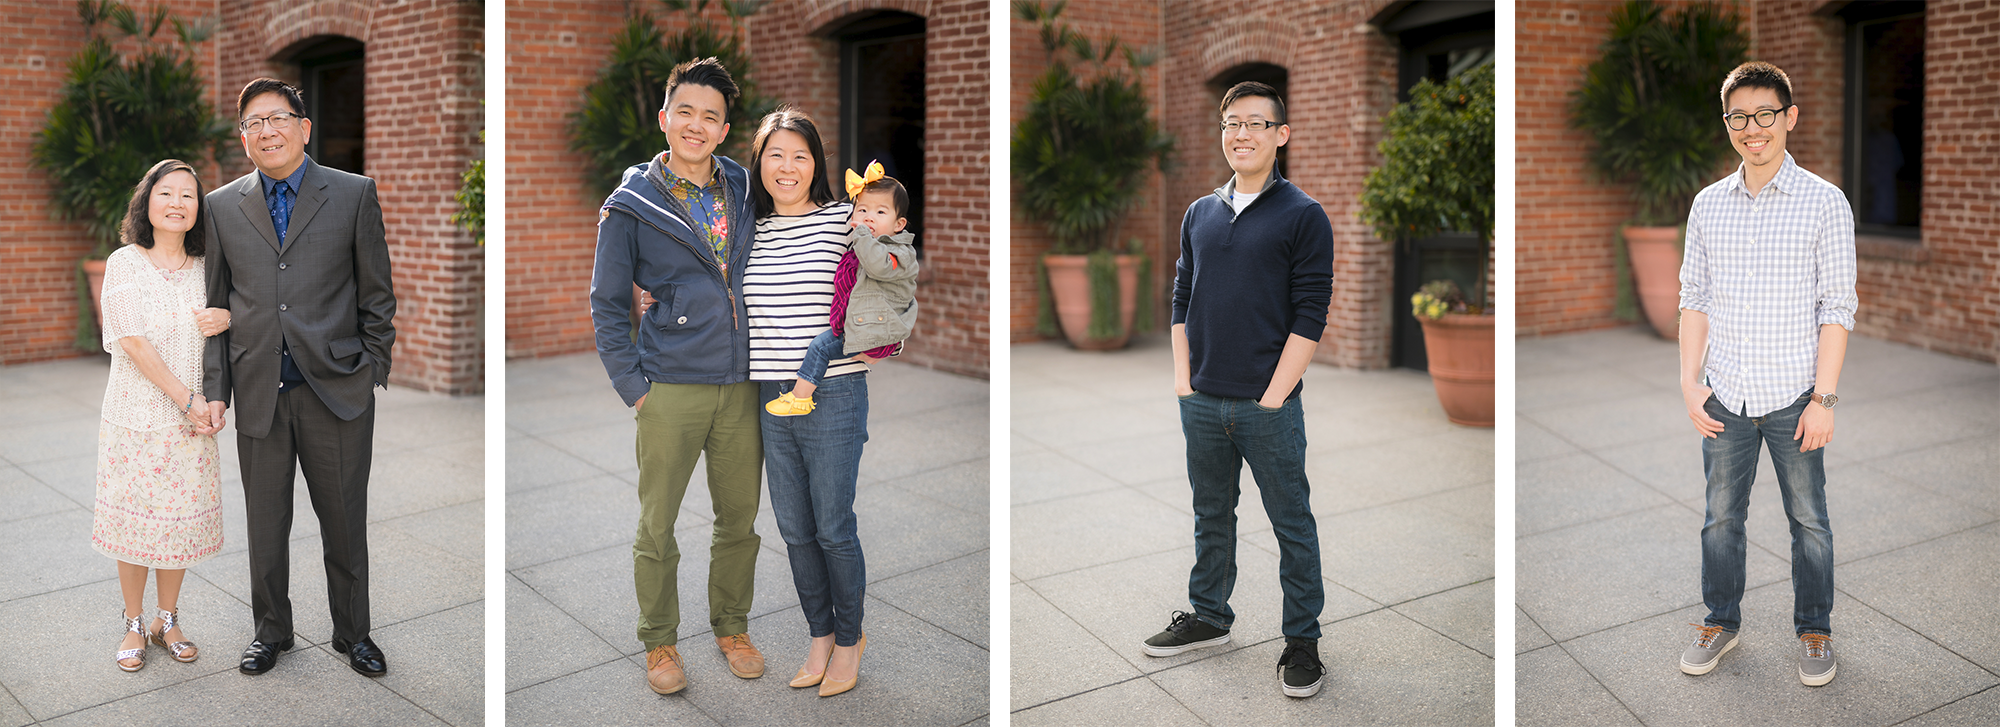 07-Felicia-Family-Old-Town-Pasadena-Family-Photos-Andrew-Kwak-Photography.png